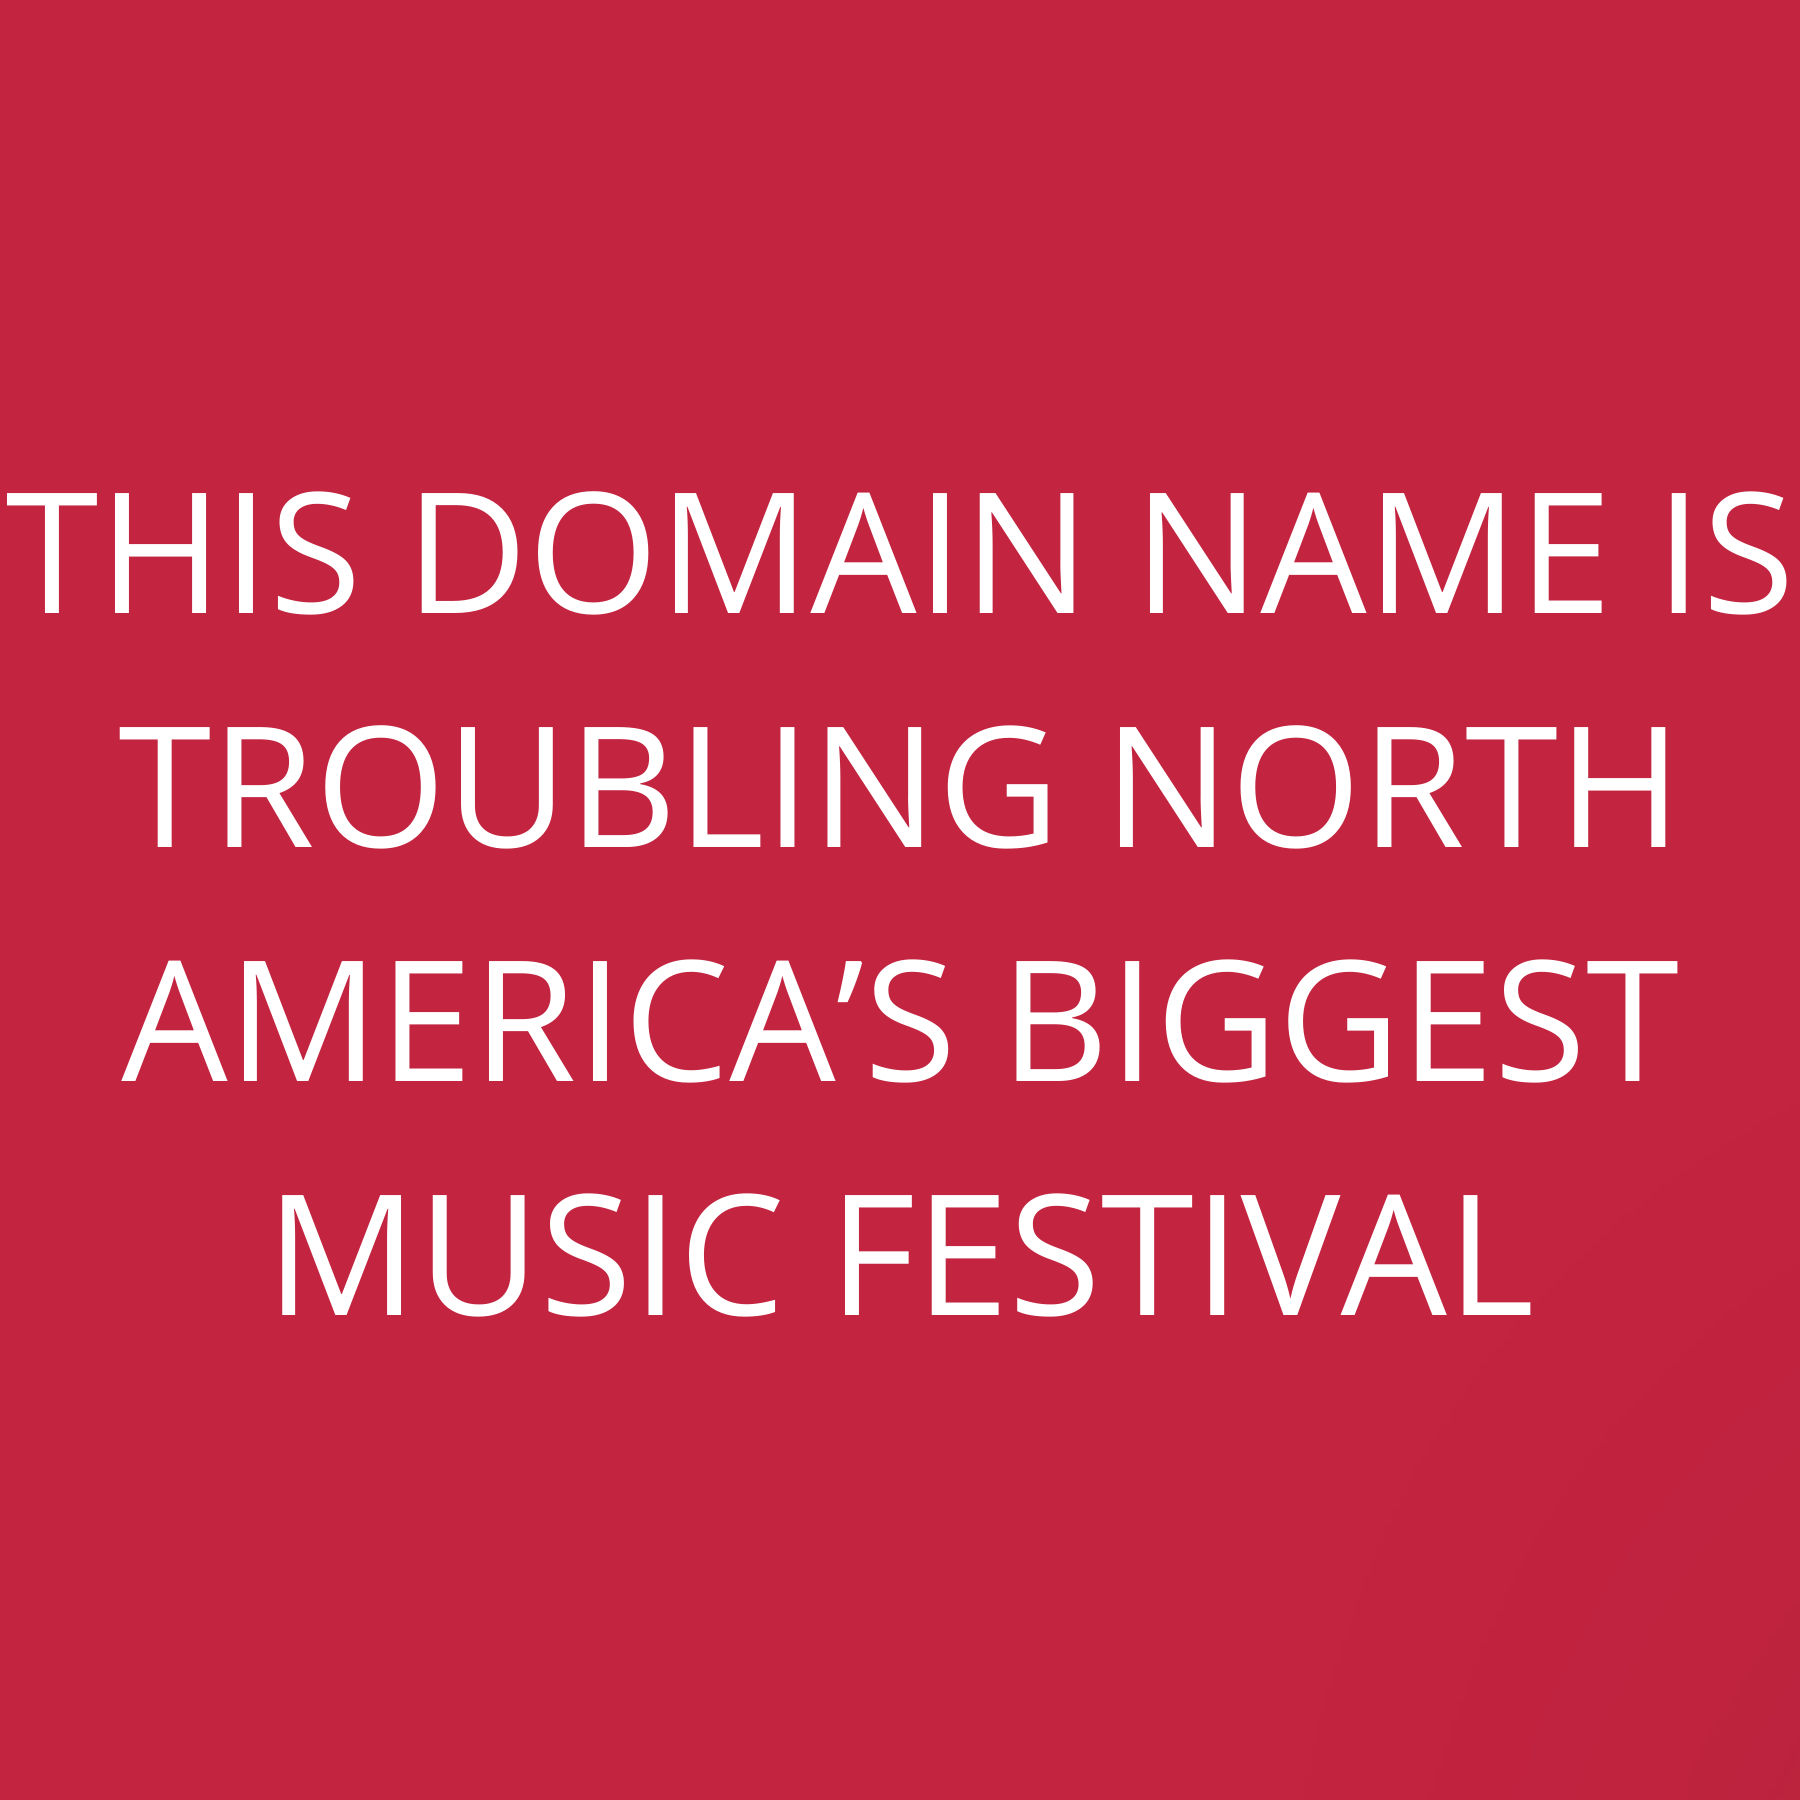 This domain name is troubling North America’s biggest music festival